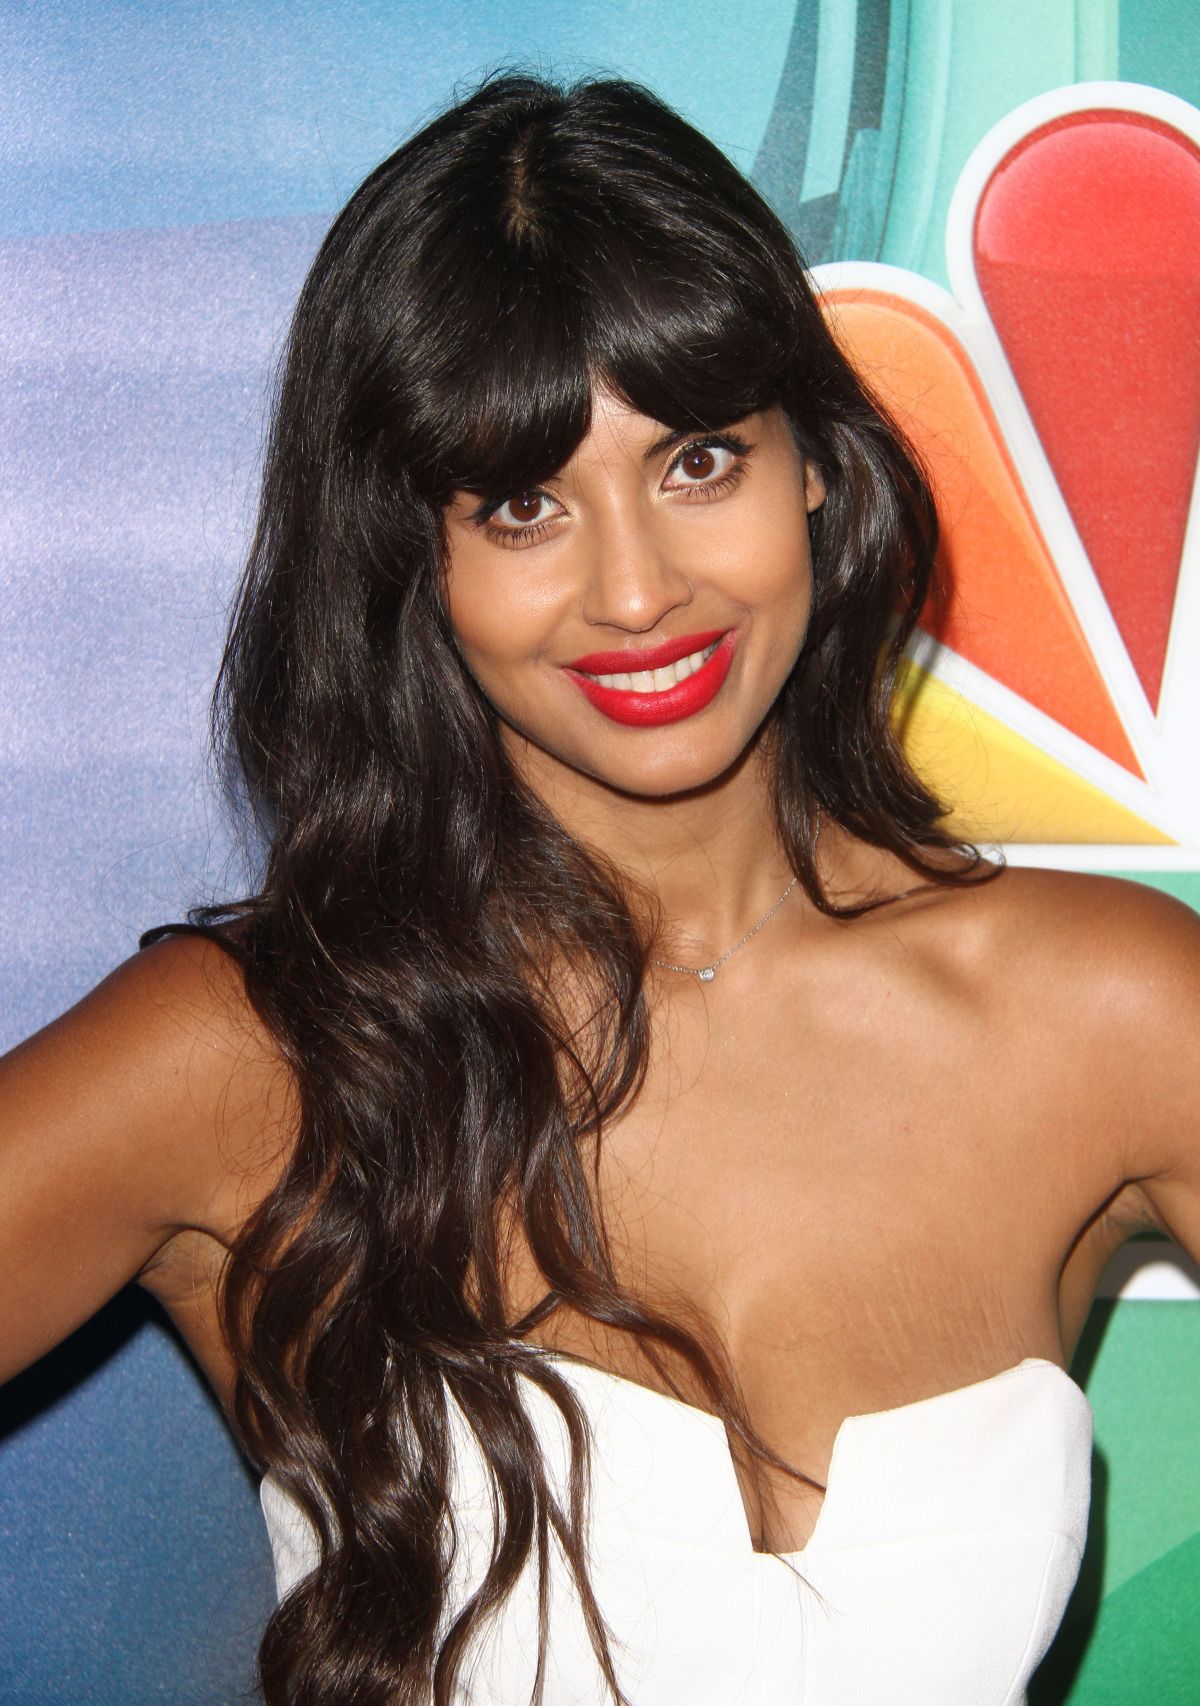 Jameela Jamil nude, pictures, photos, Playboy, naked, topless, fappening